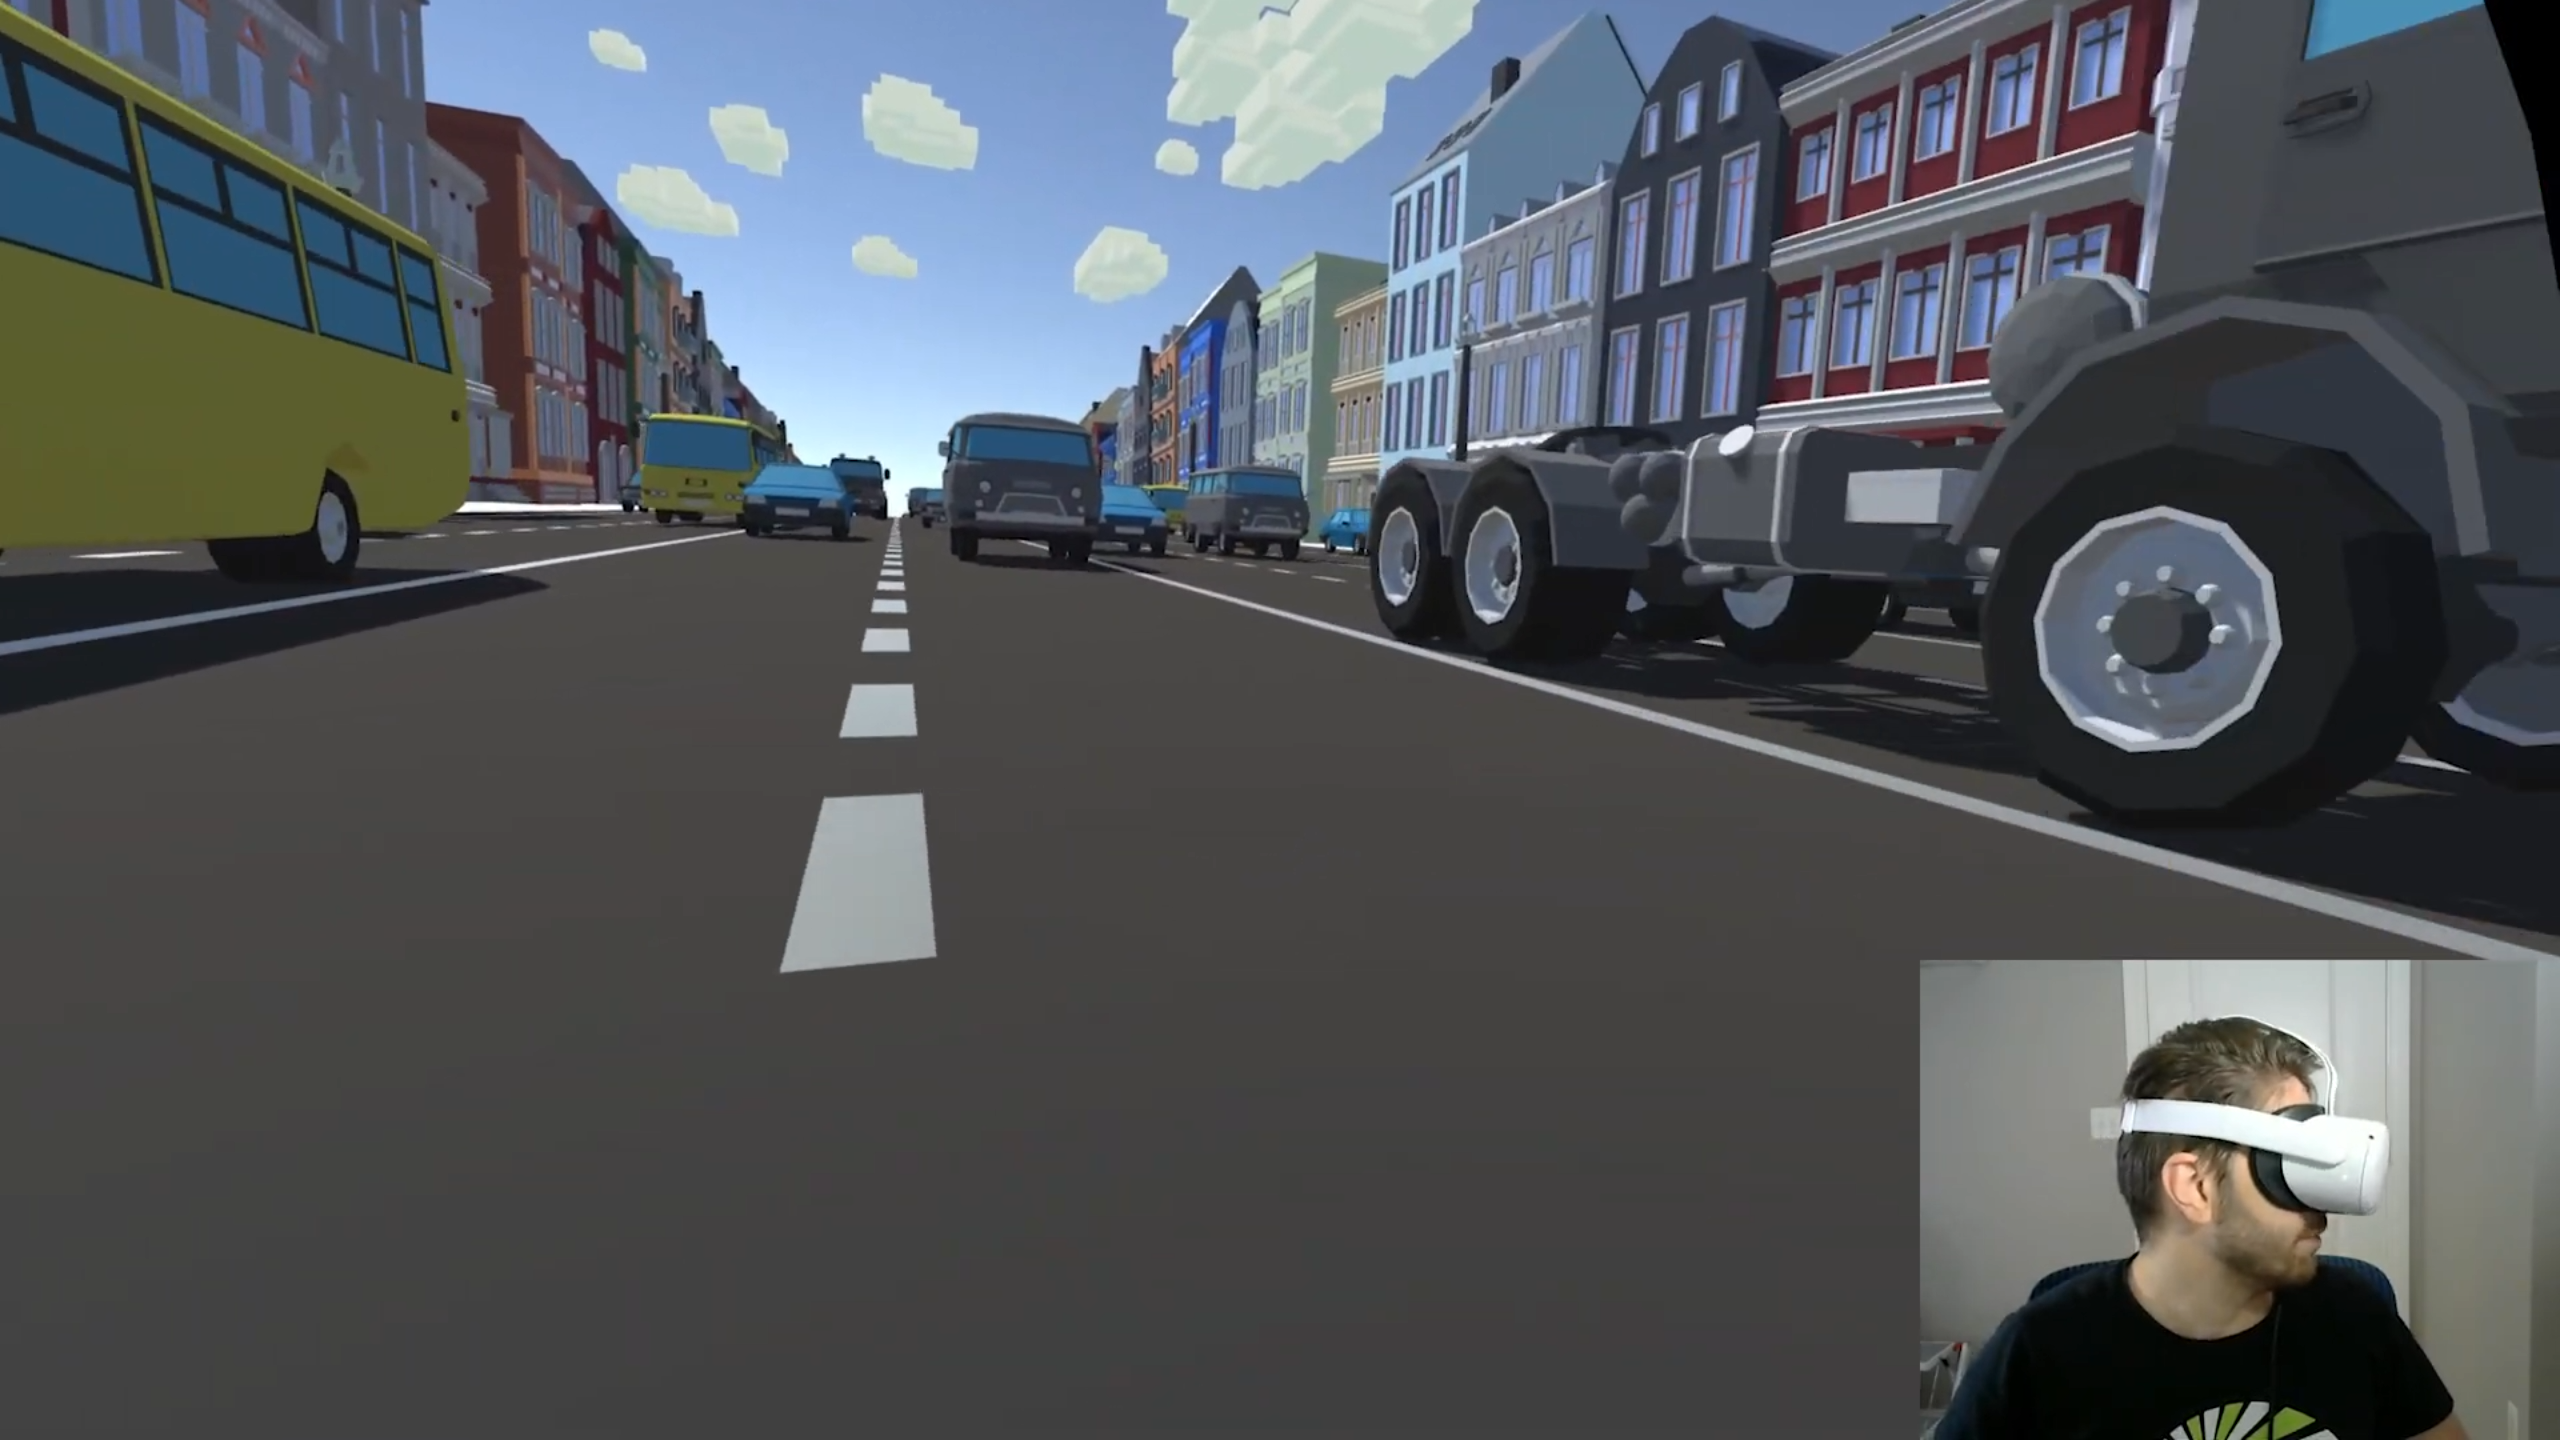 Why Did The Chicken Cross The Road? – Virtual Reality Game (THESIS RESEARCH)